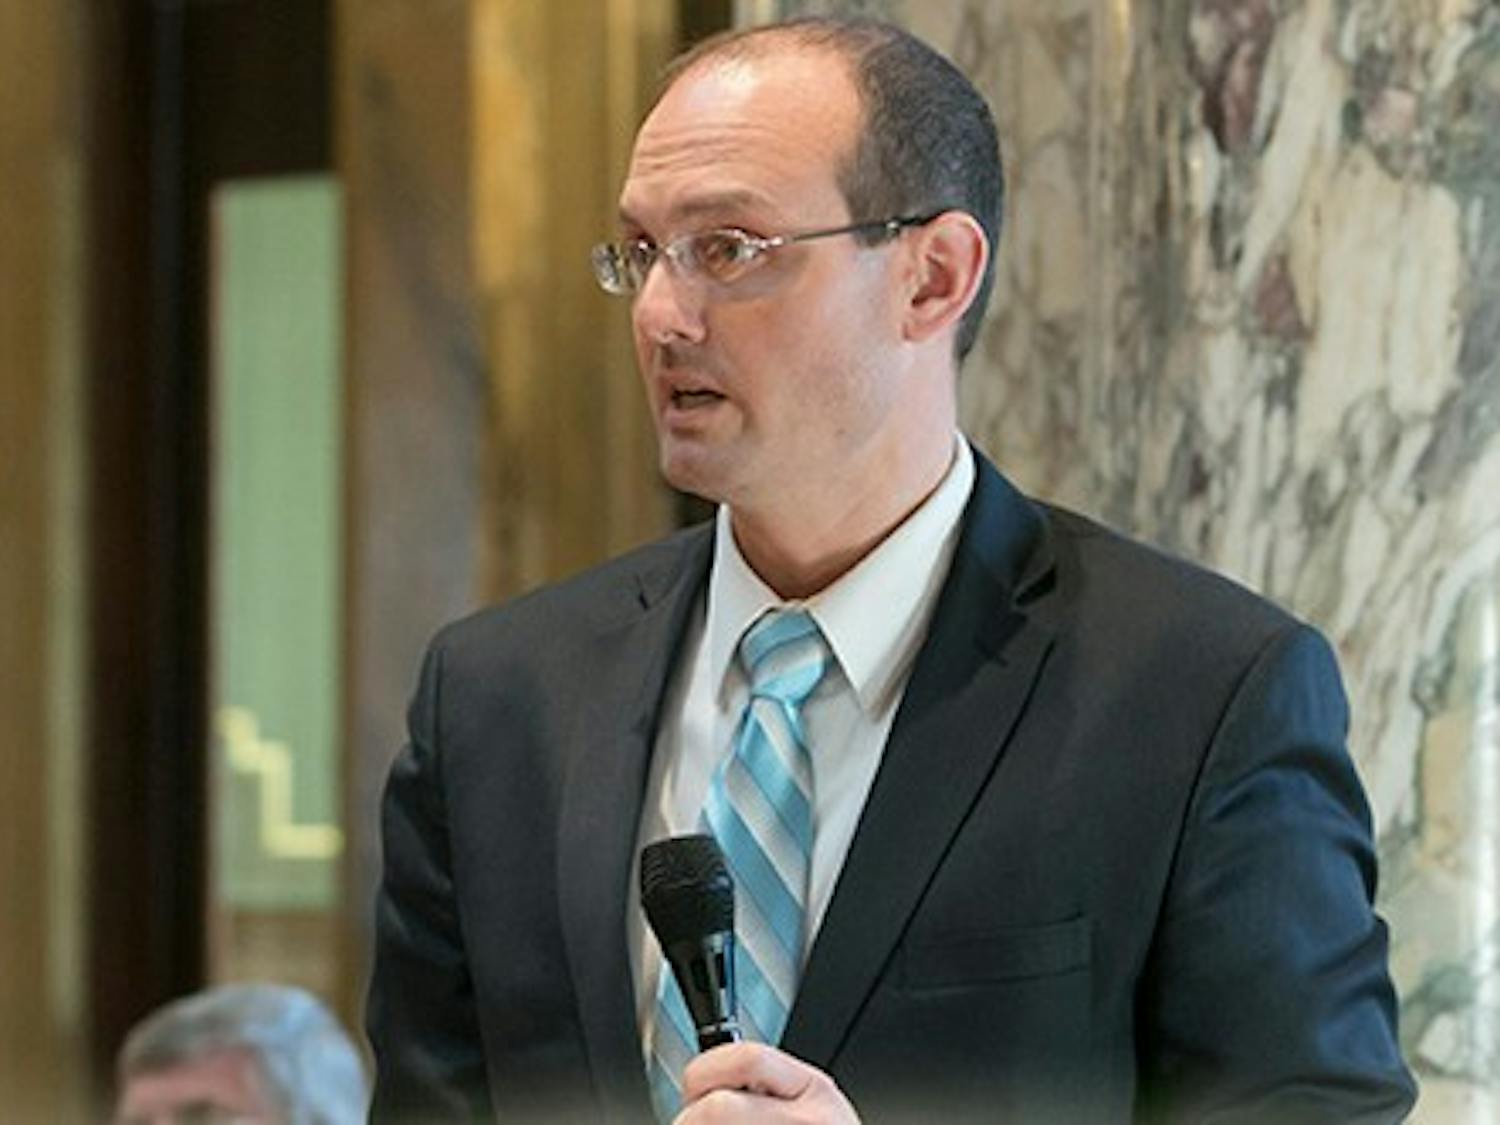 As state legislators clash over how to ensure student safety from gun violence, state&nbsp;Rep. Jesse Kremer,&nbsp;R-Kewaskum,&nbsp;has introduced a bill to allow guns into private schools.